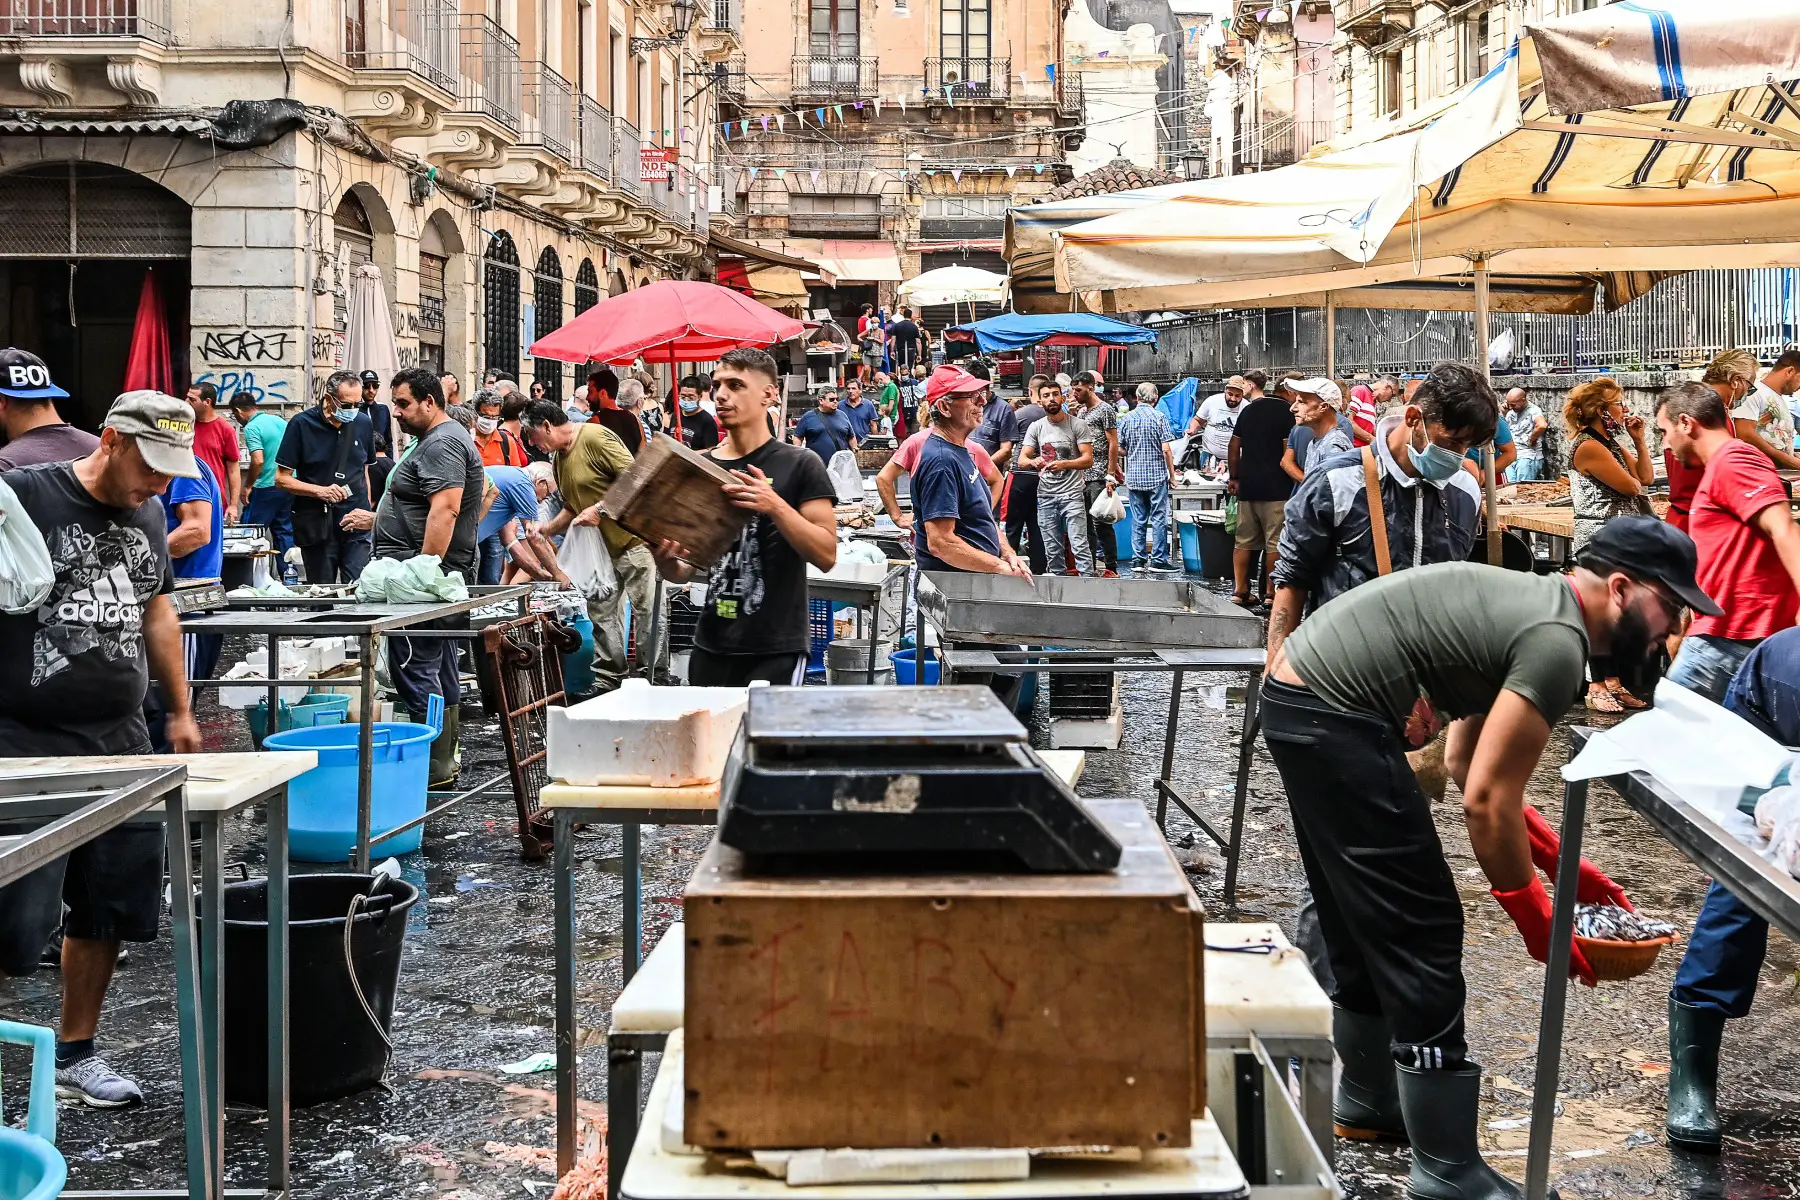 Crowds at a fish market in Catania, Italy